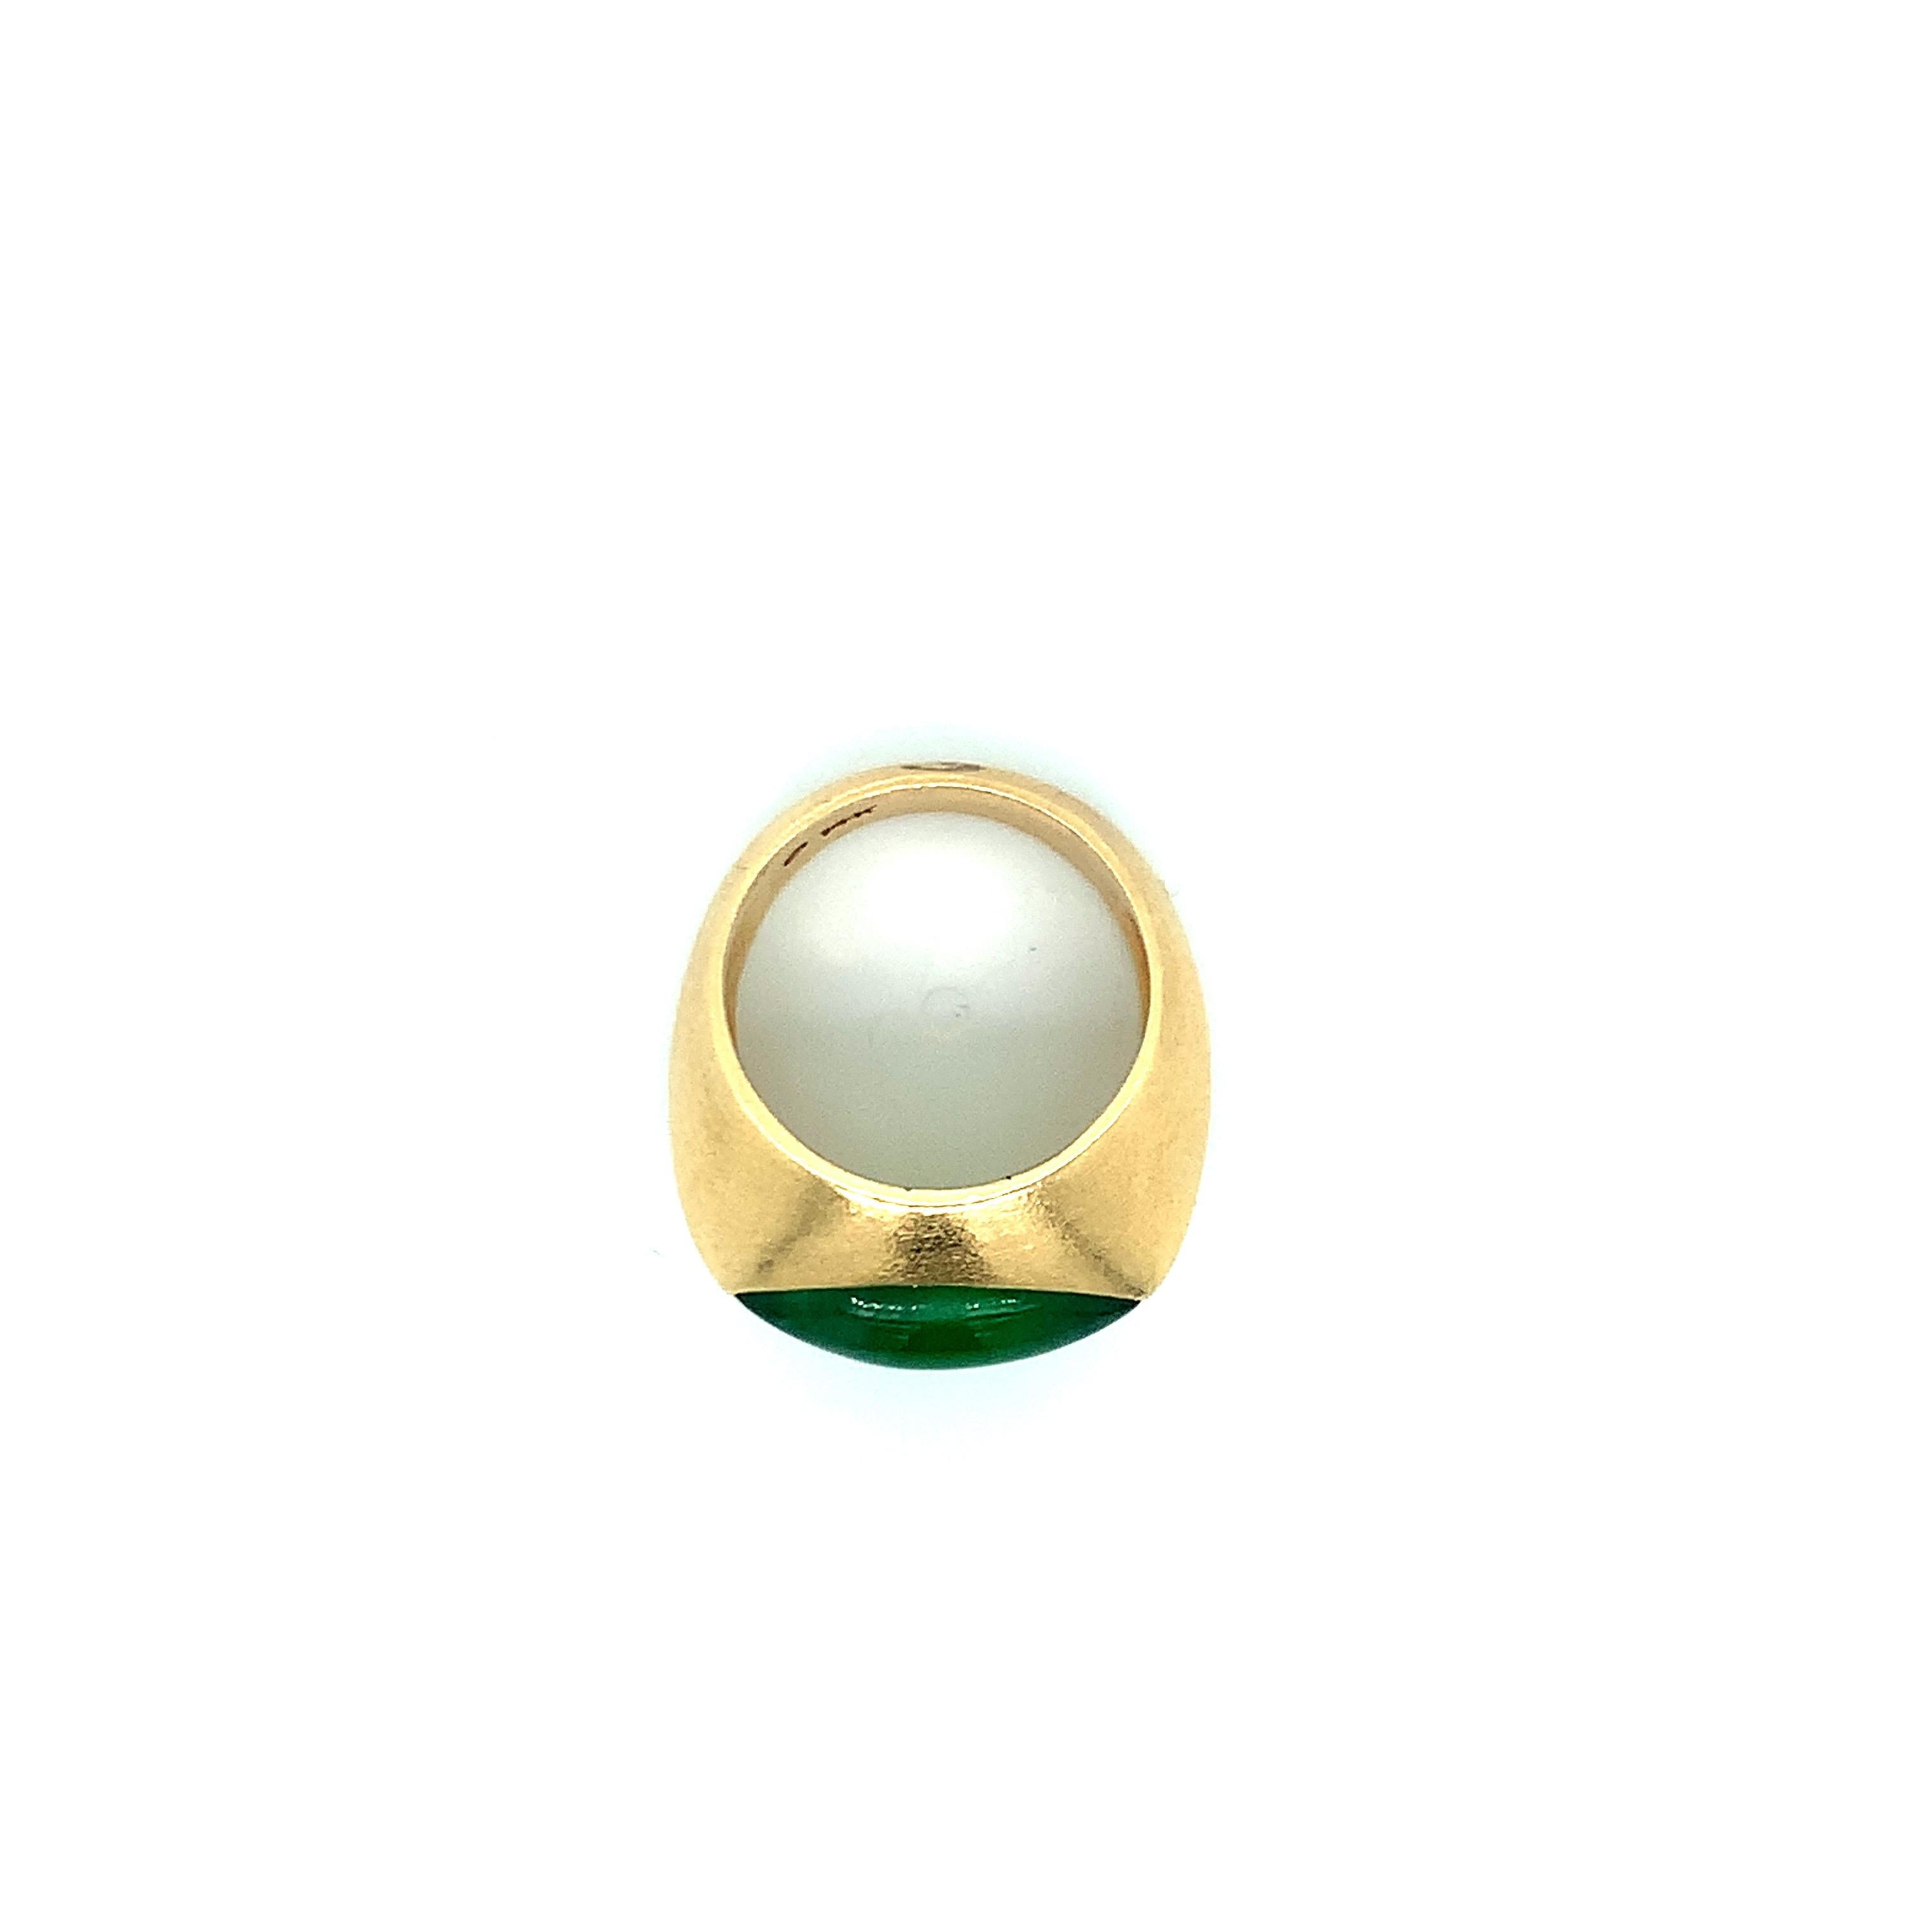 A 14 karat gold ring with a natural type A jade at its center. Total weight: 8.7 grams. Size 6.25.